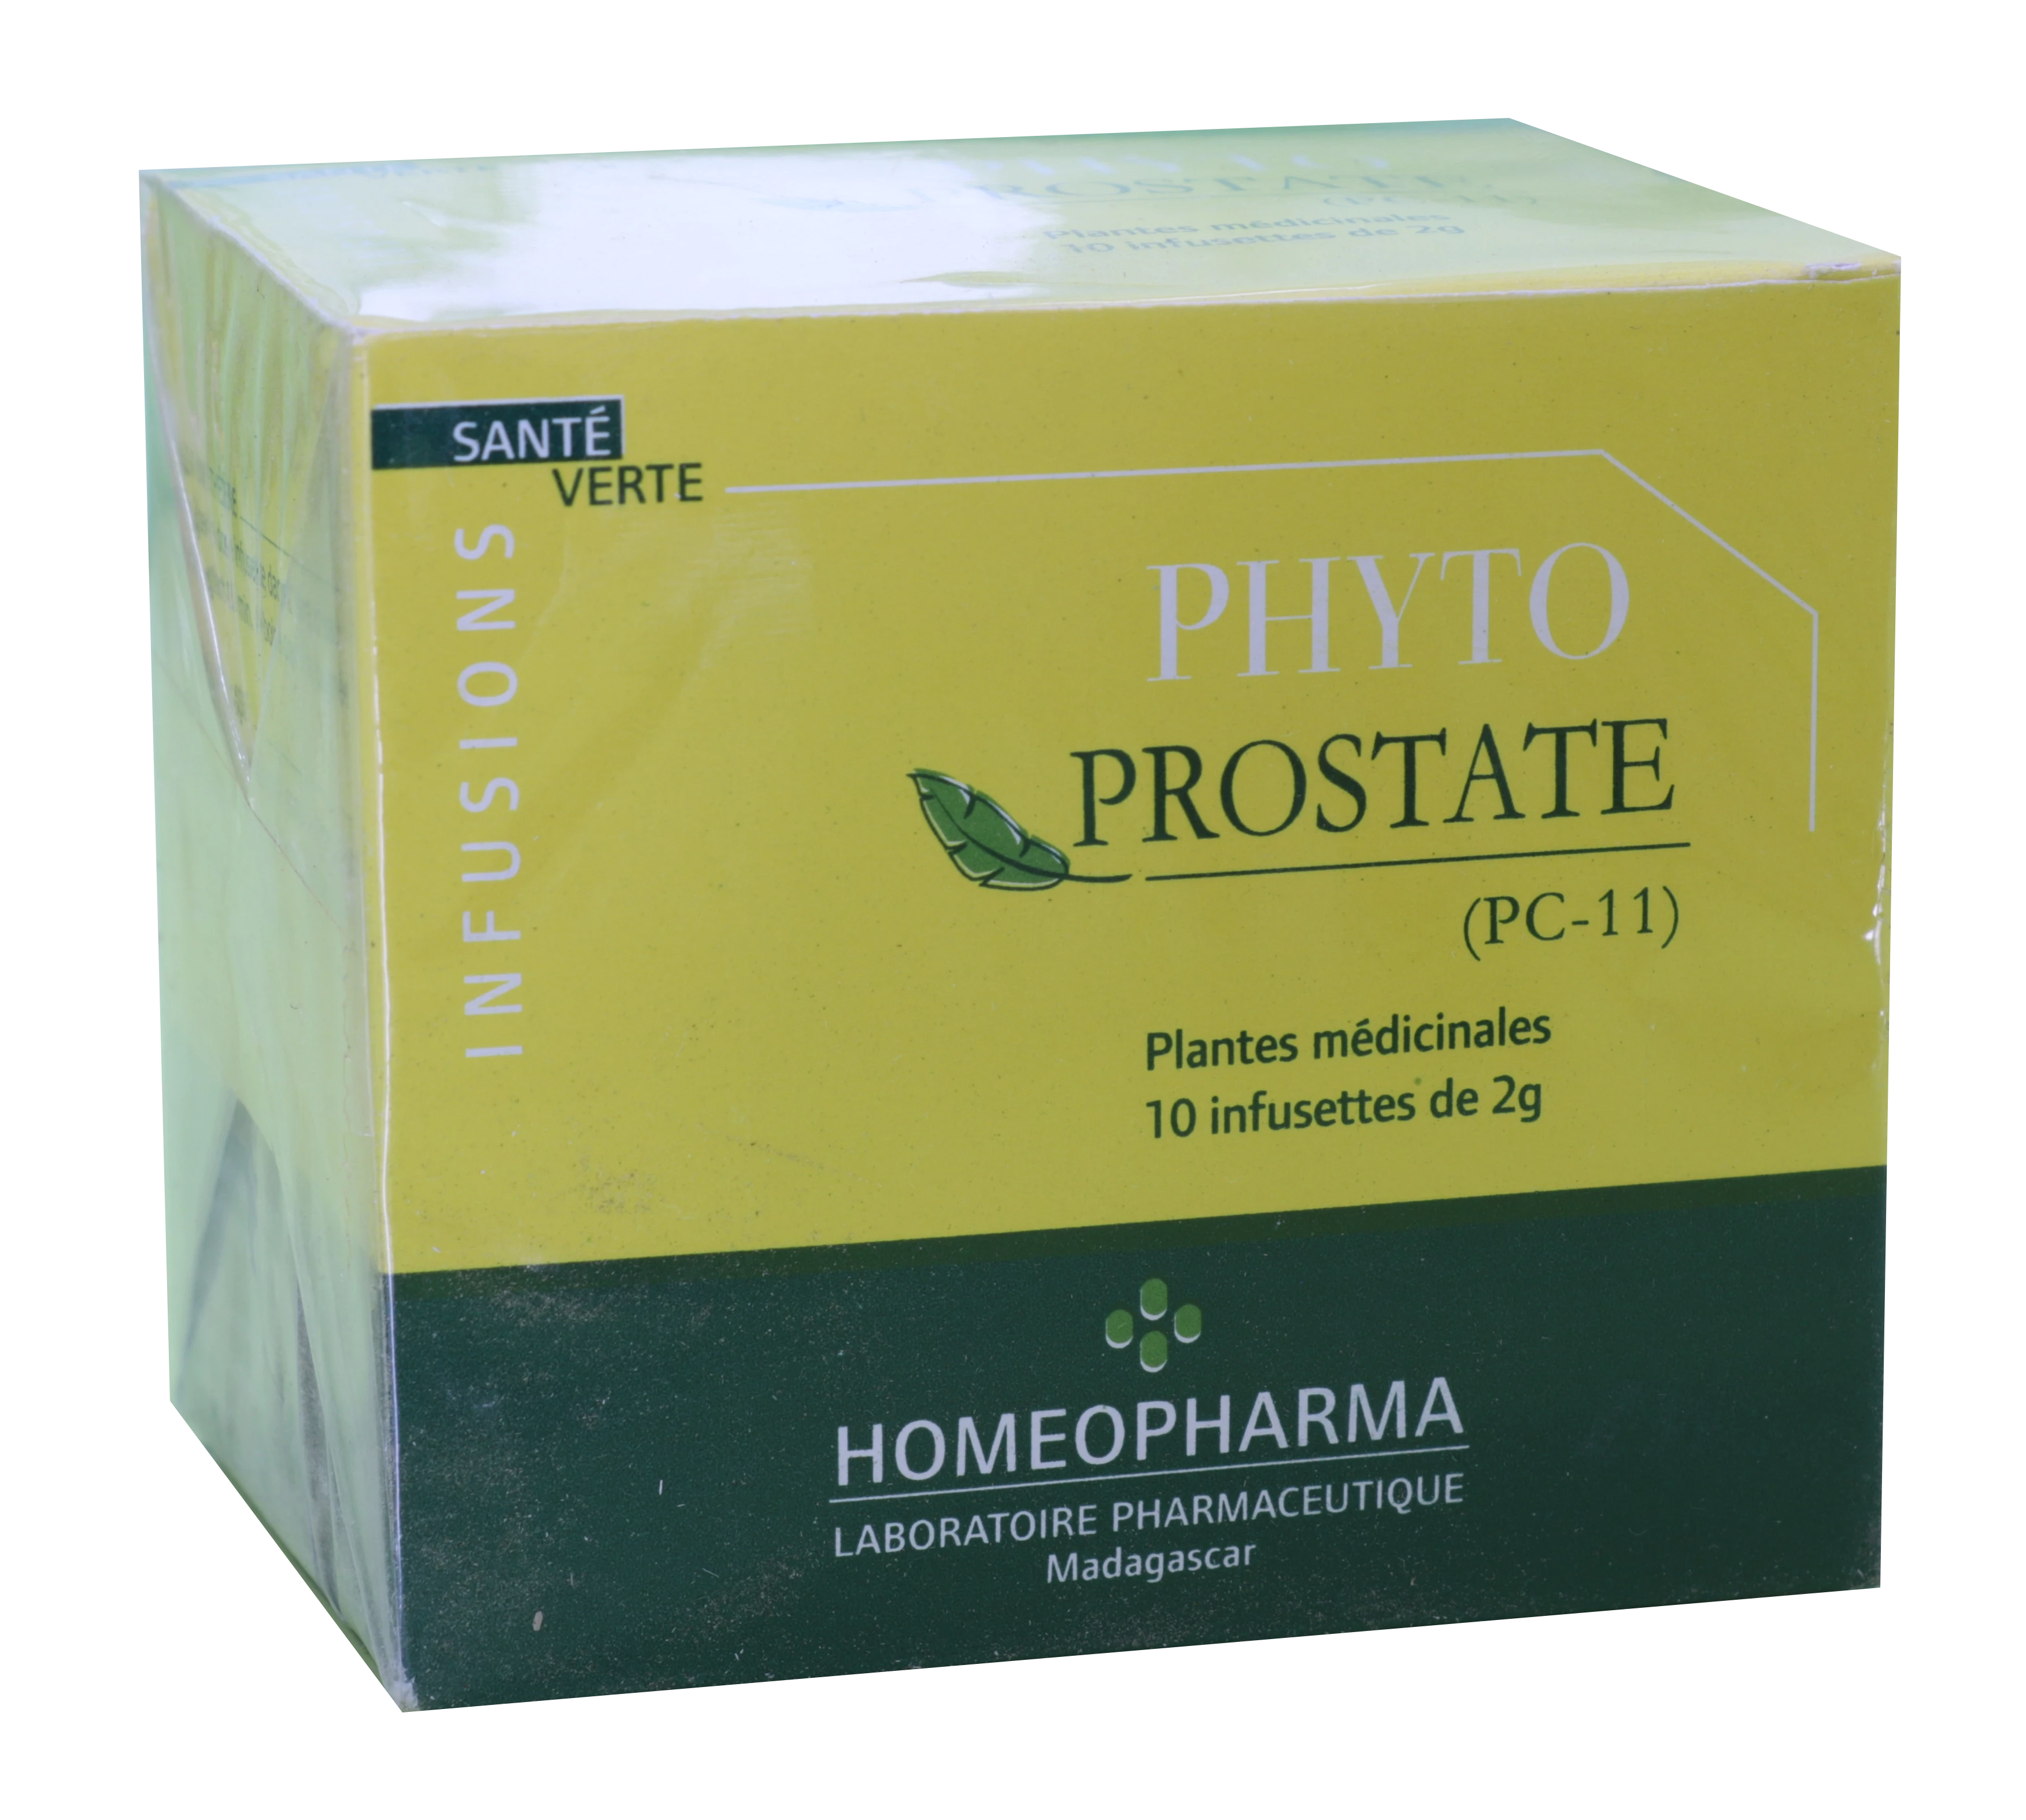 Phytotherapie Traditionnelle Pc11-phyto-prostate Bte 20 Infusettes - HOMEOPHARMA